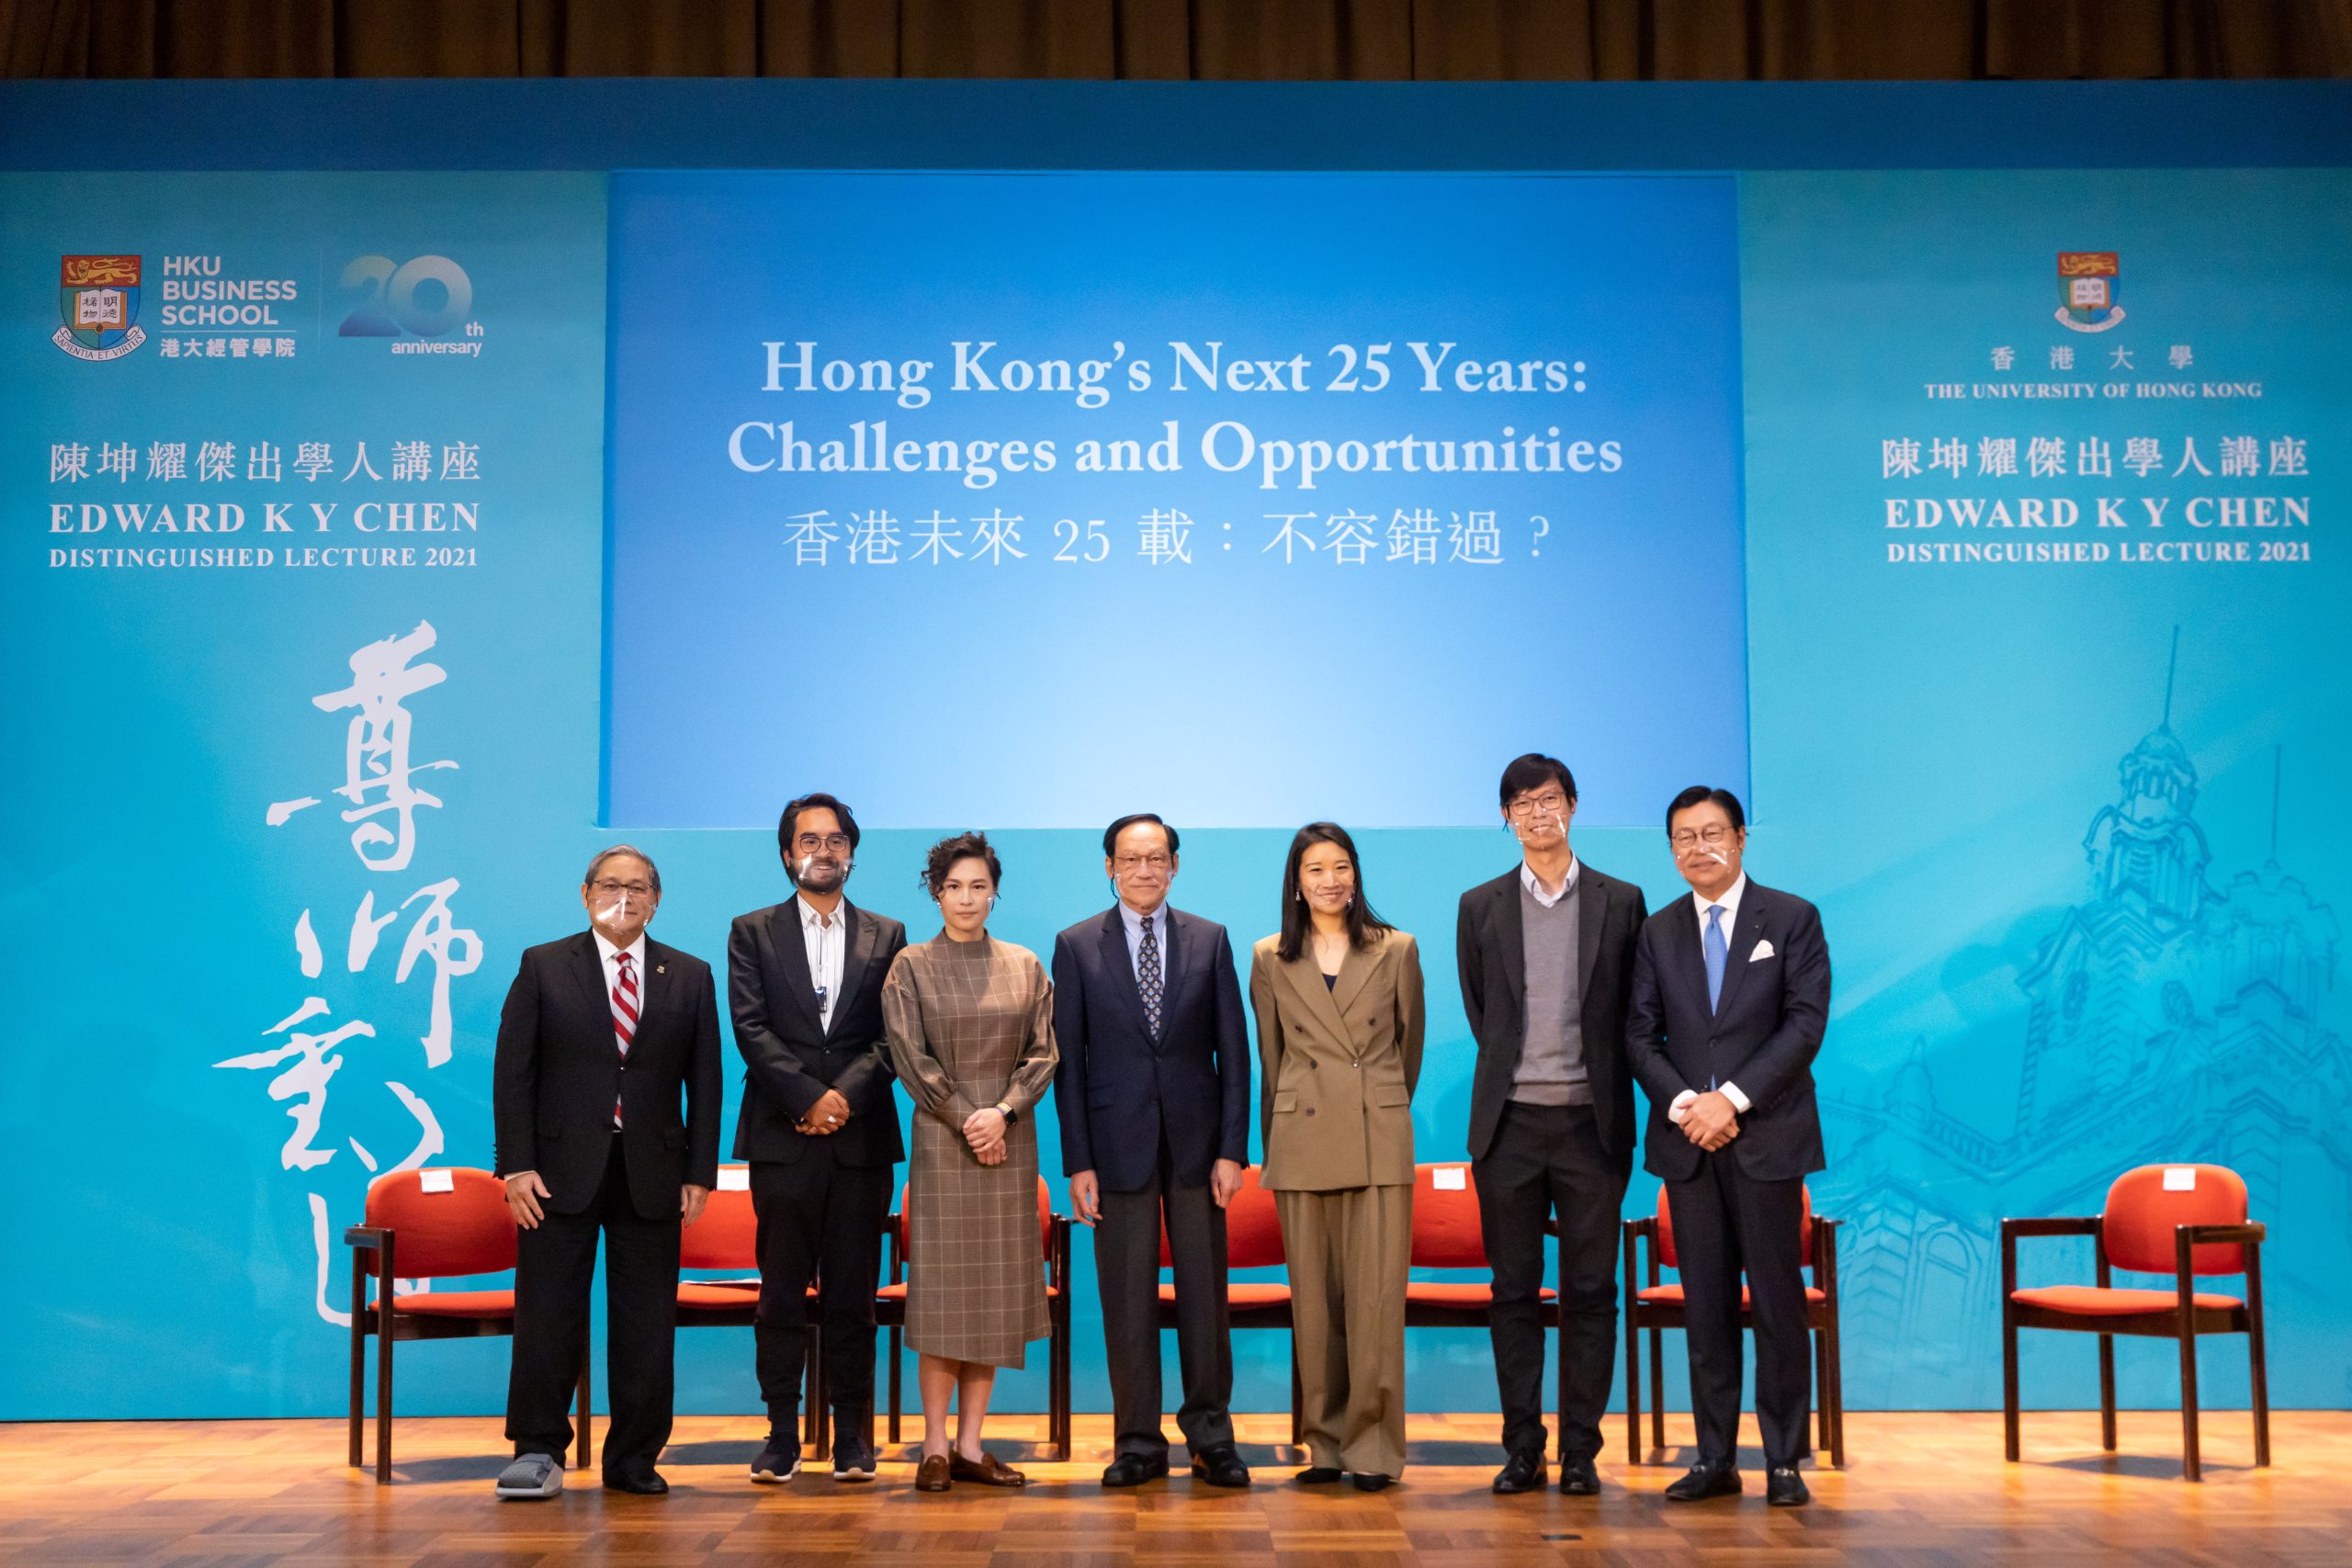 Edward K Y Chen Distinguished Lecture Series 2021